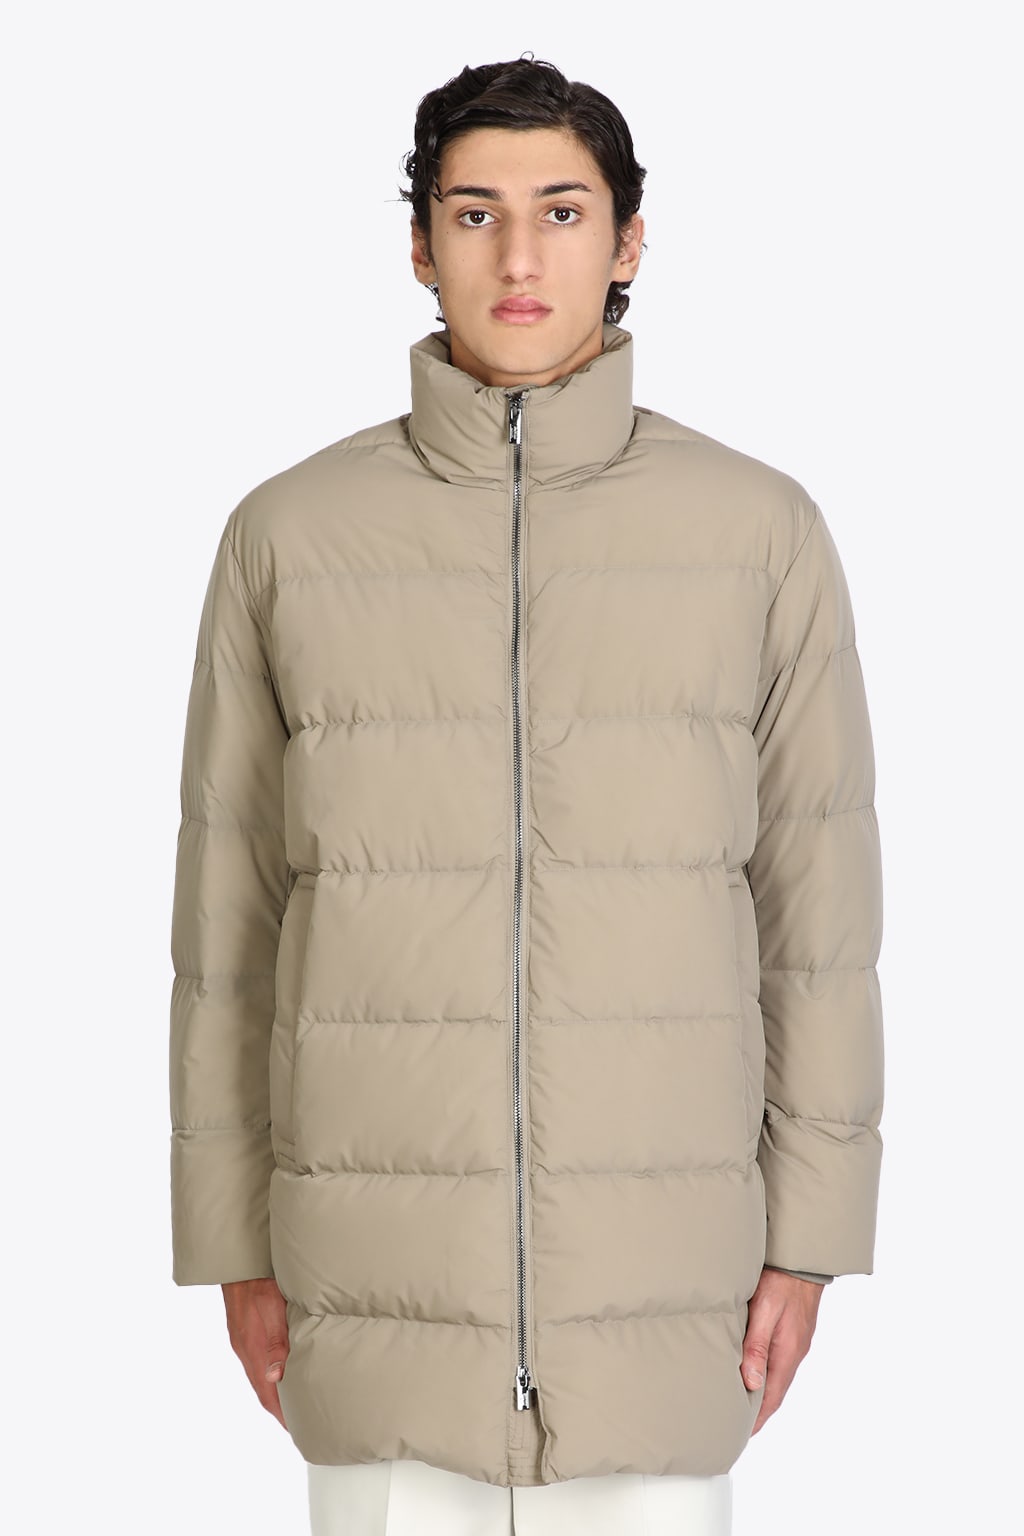 Emporio Armani Down Jacket Beige stretch nylon mid-lenght puffer jacket.